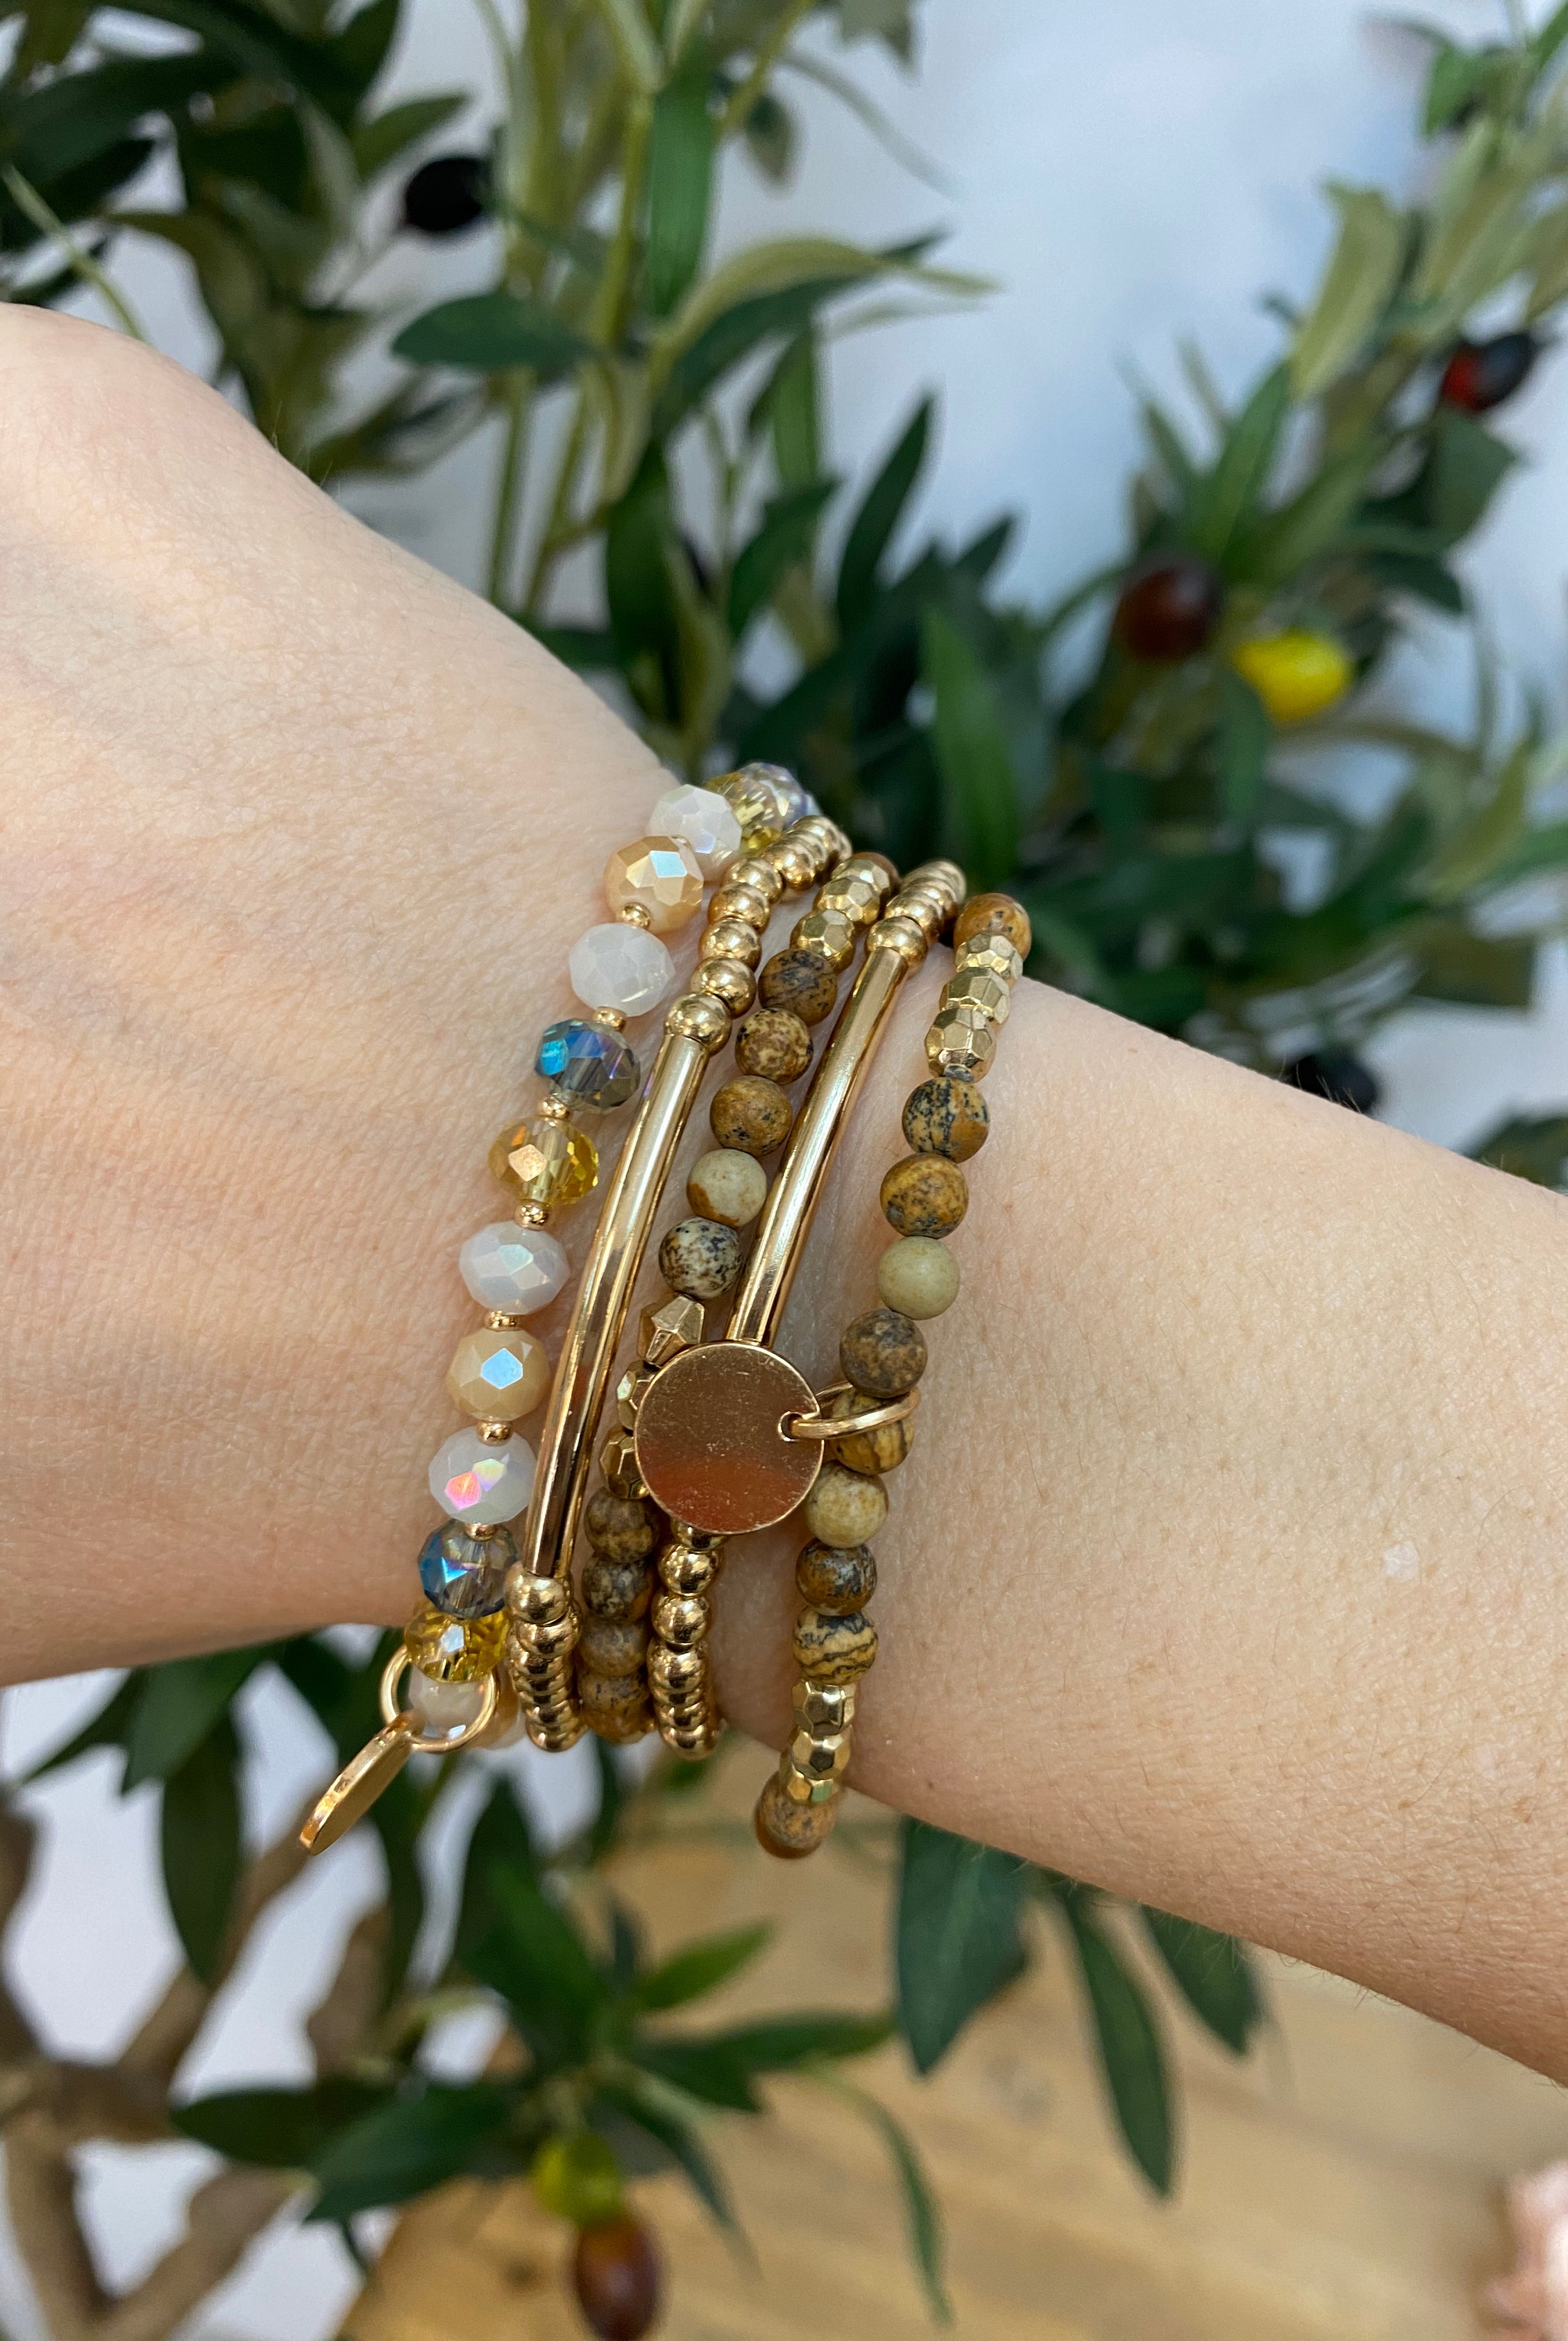 Sand and Fun Bracelet Stack-Bracelets-The Lovely Closet-The Lovely Closet, Women's Fashion Boutique in Alexandria, KY